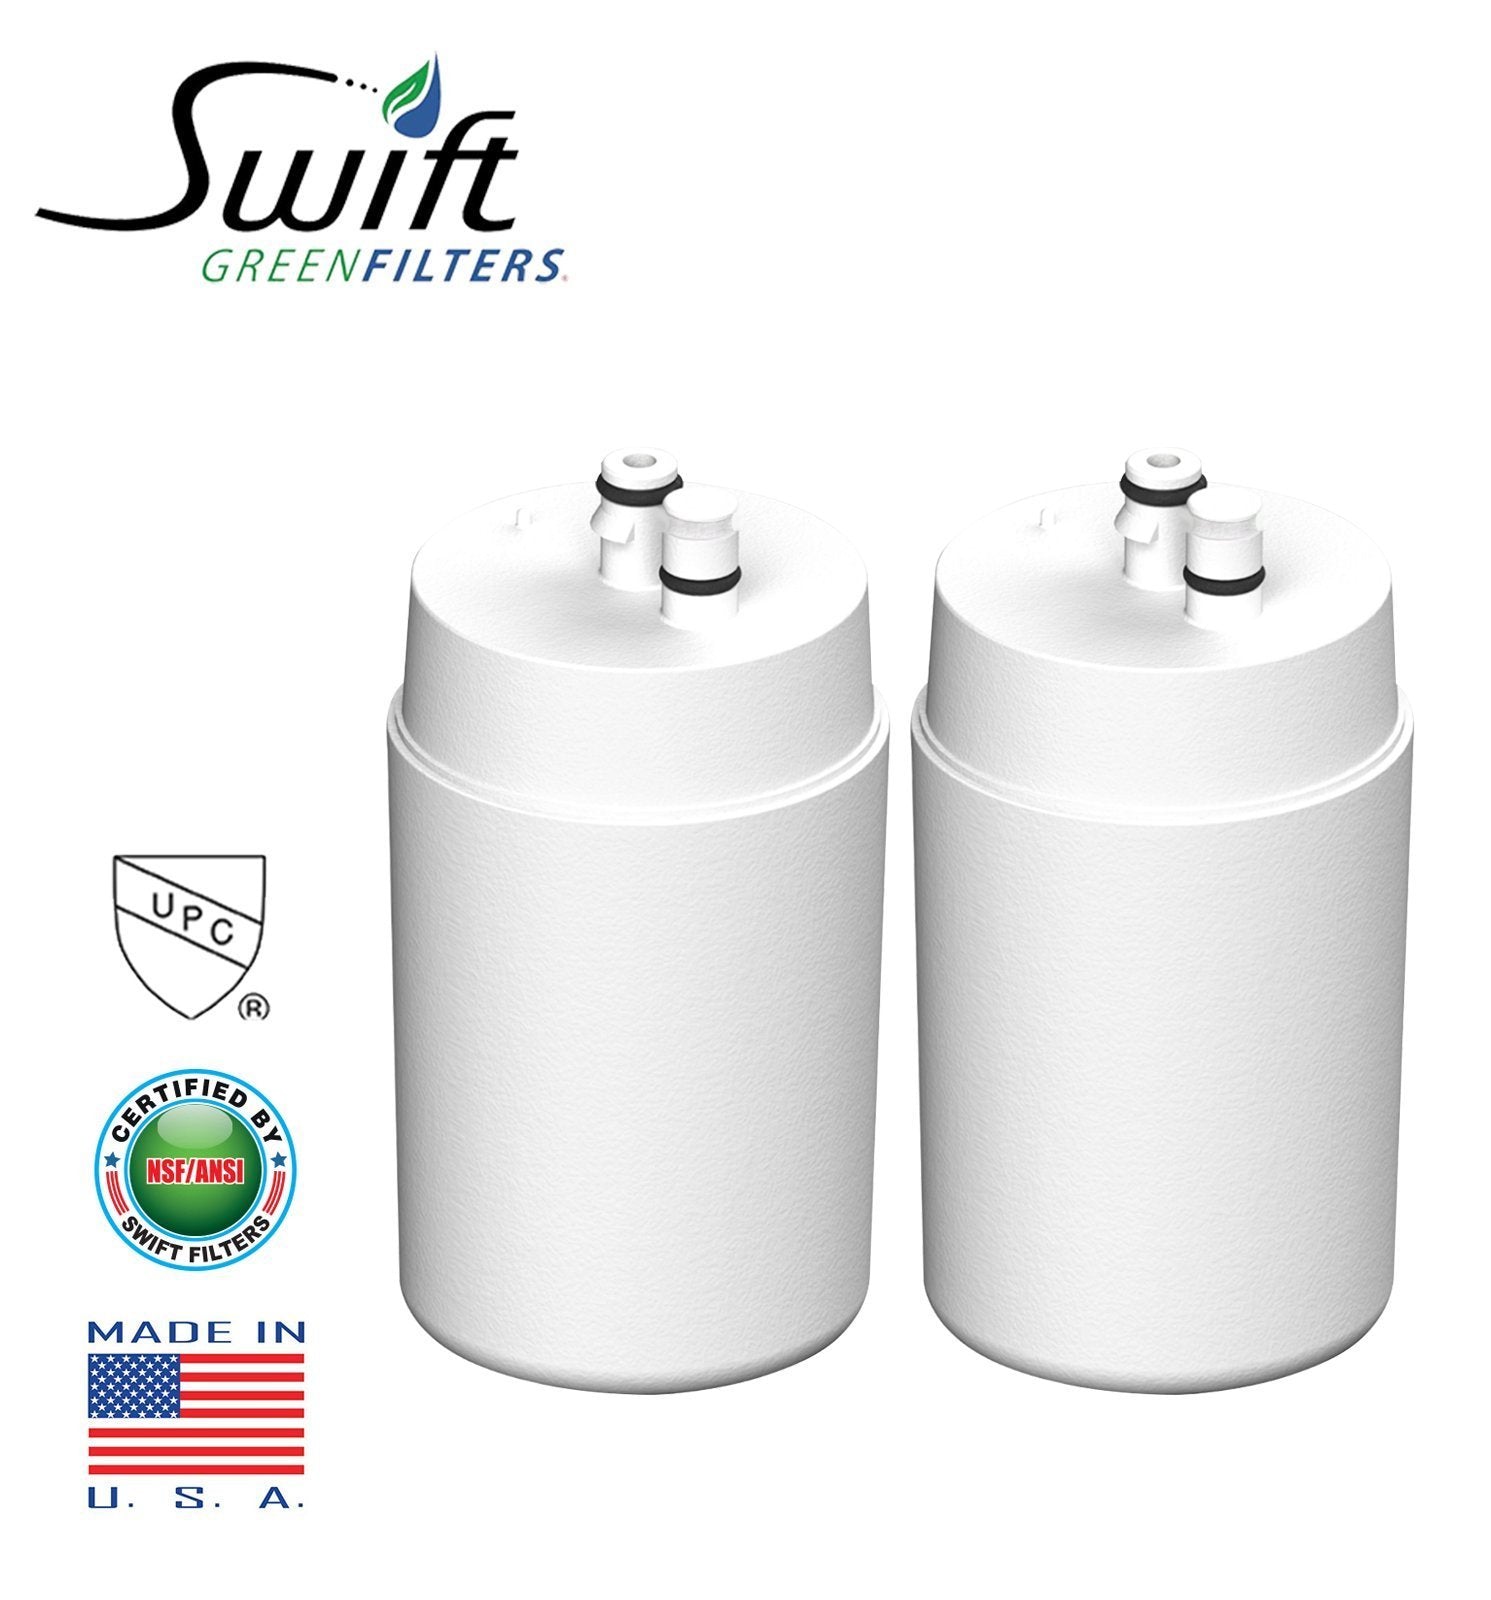 Swift Green Filters Brita Tap Faucet Water Filtration System Replacement Filter, White SGF-BTWH Rx, Replacement for Models CXB-016, COX42401, COX42617, 42618, brita4c - The Filters Club